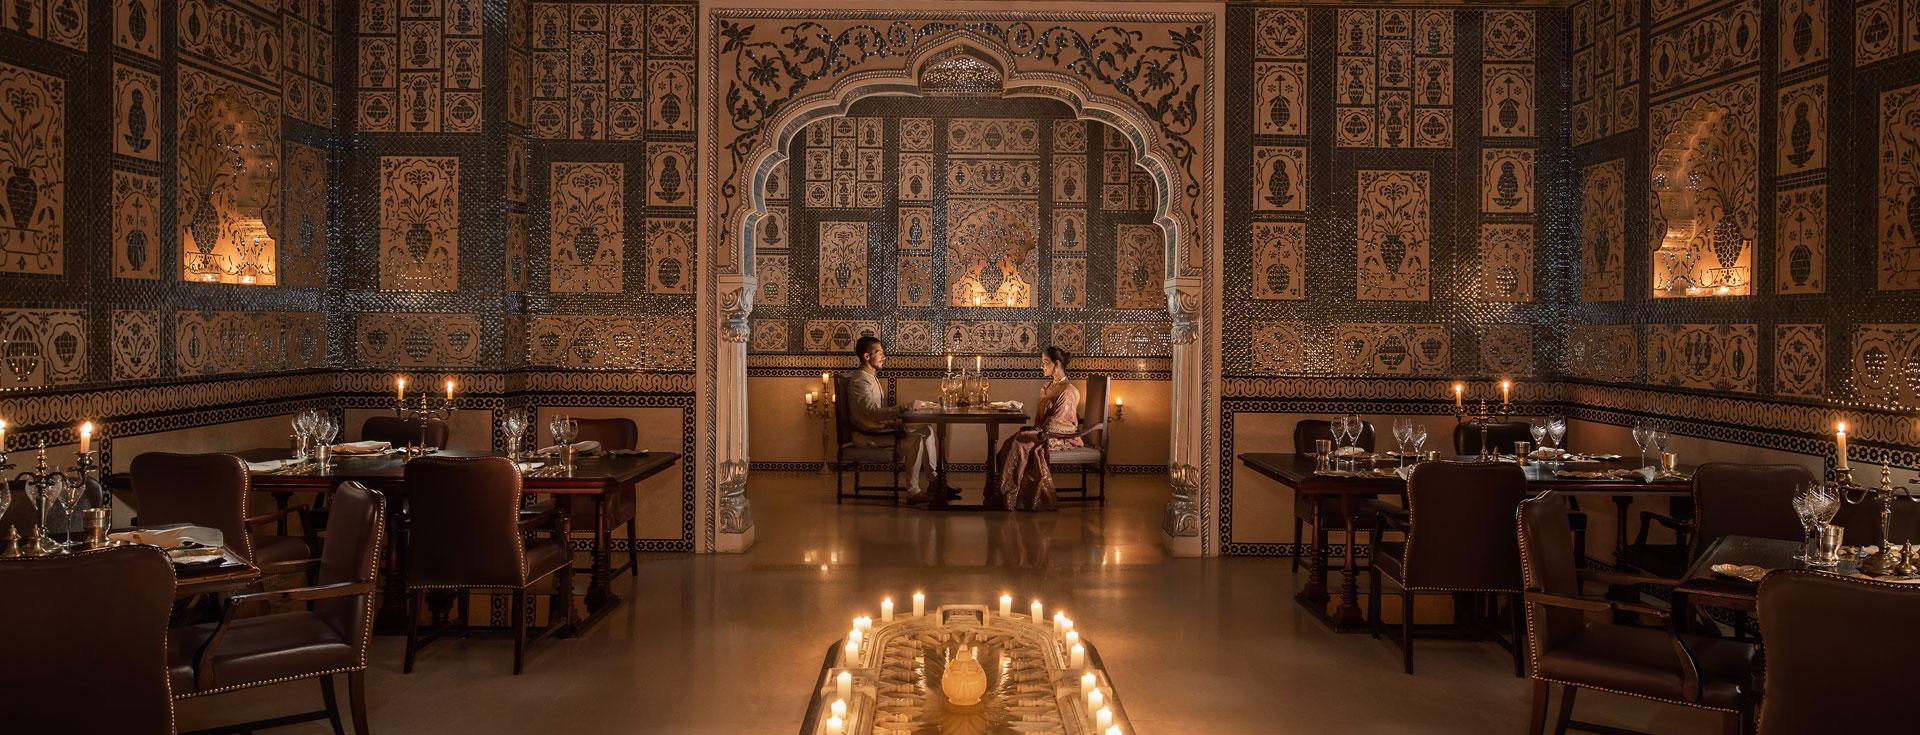 Indulge in the signature cuisine at Mohan Mahal,the premier Rajasthani restaurant at The Leela Palace Jaipur